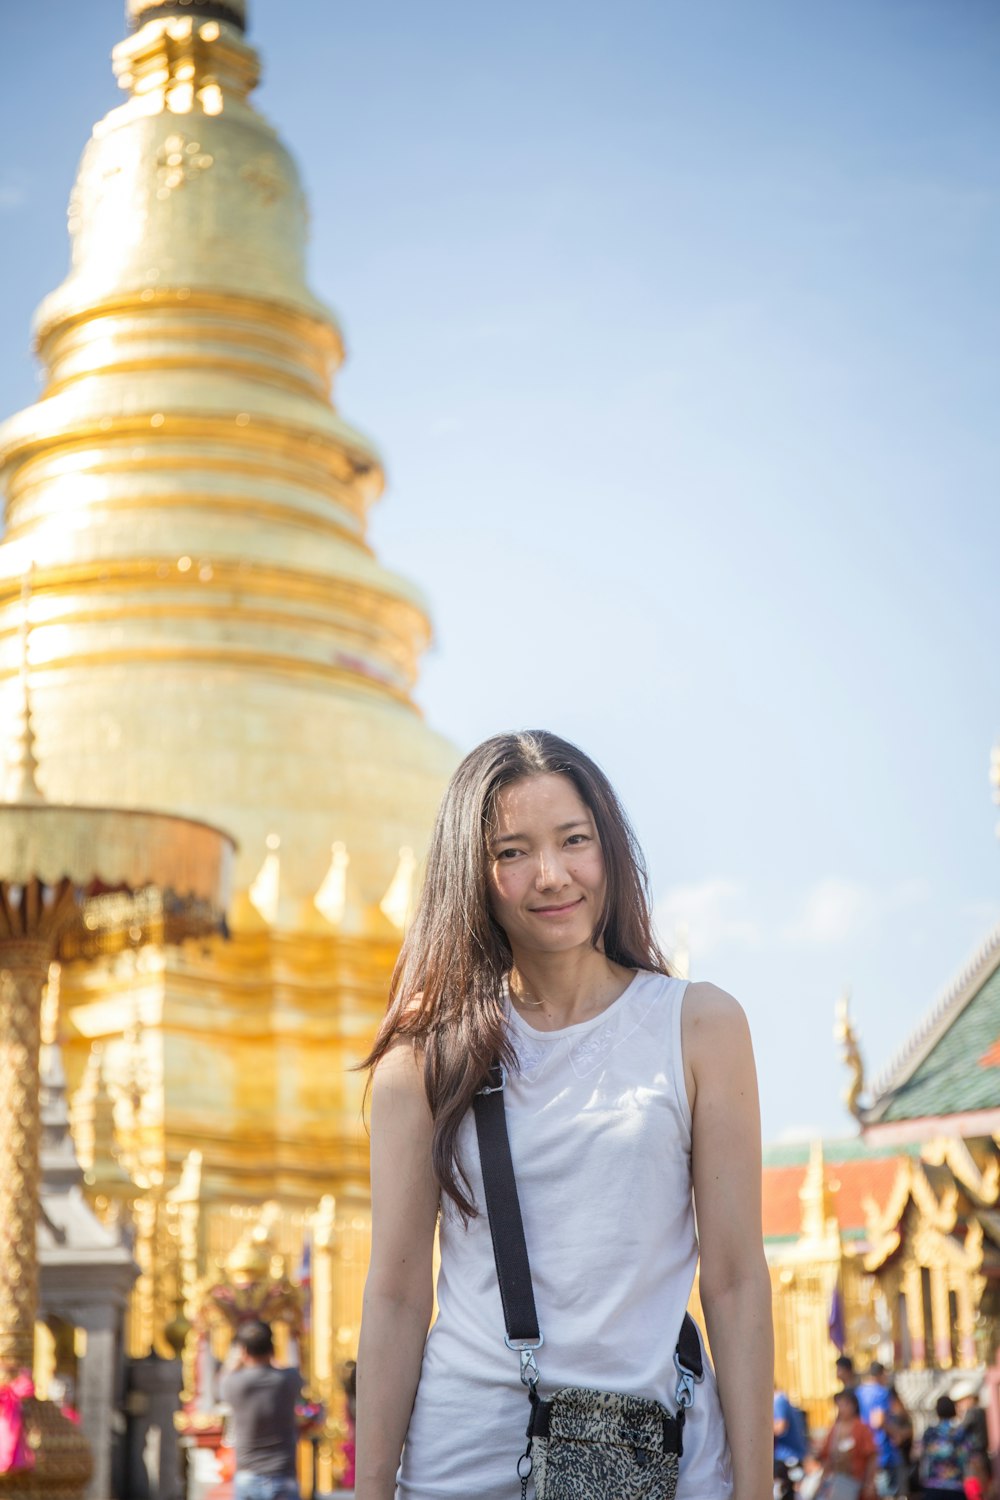 woman in white tank top standing near gold tower